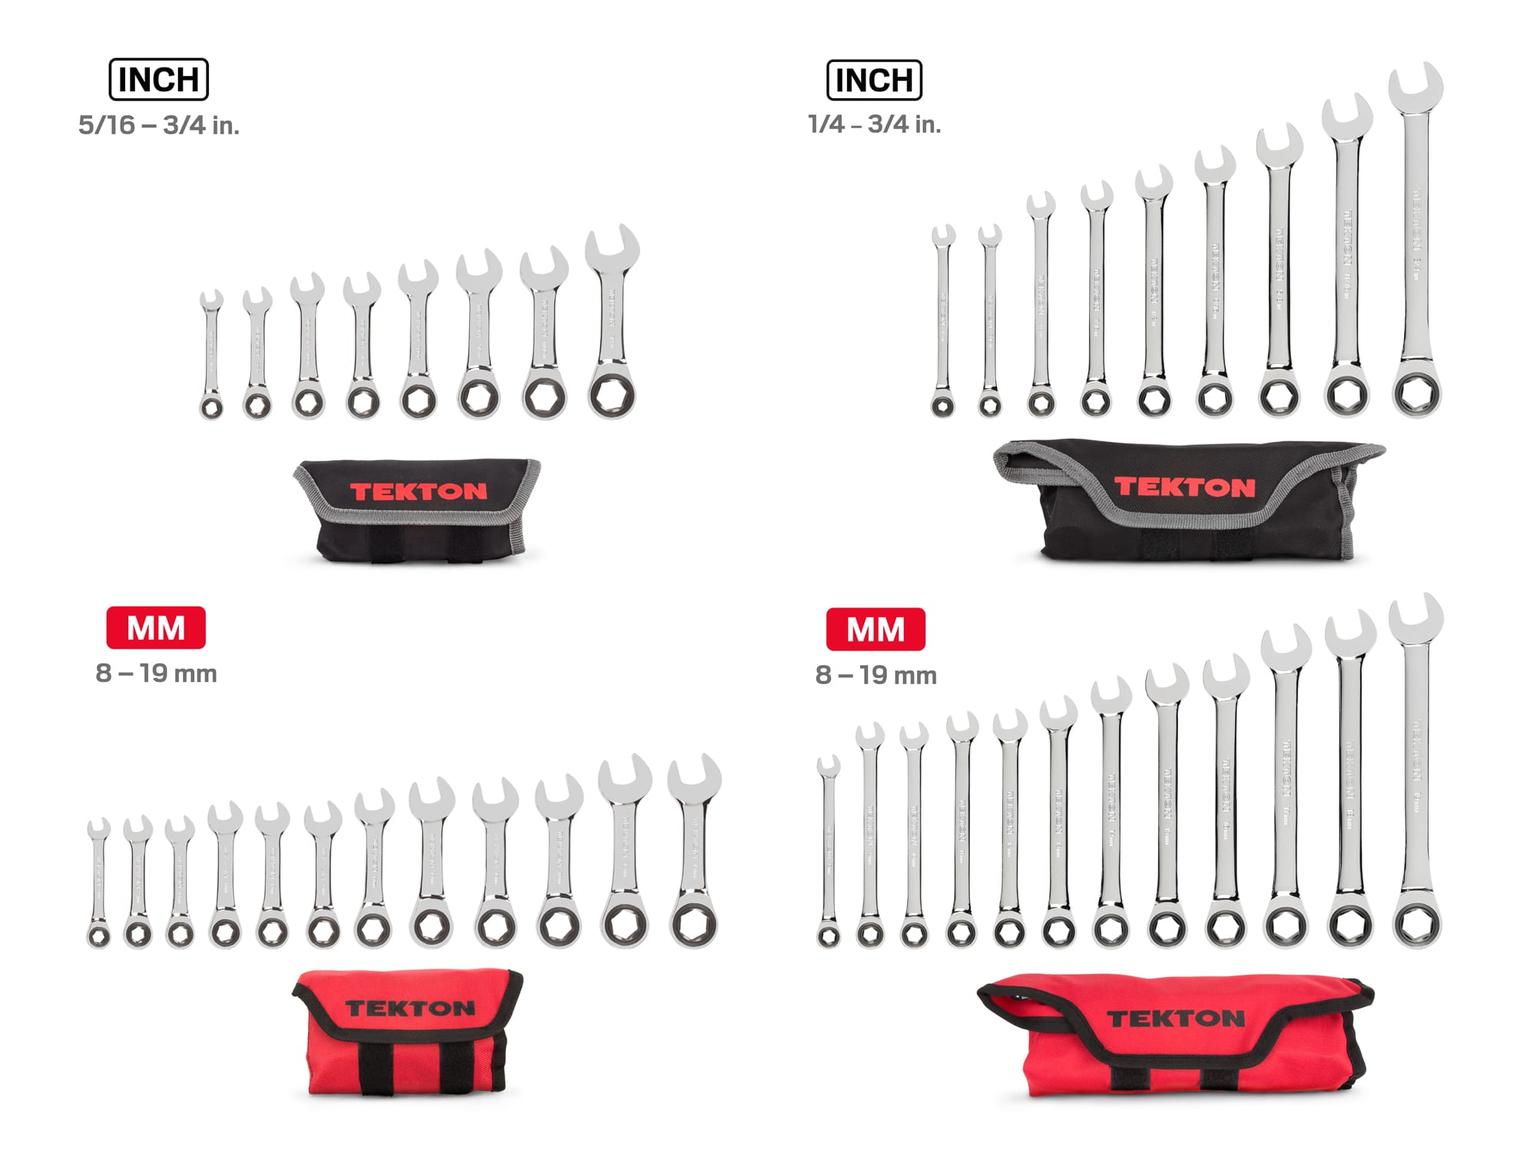 TEKTON WRN53661-T Stubby and Standard Length Ratcheting Wrench Set with Pouch, 41-Piece (1/4-3/4 in., 8-19 mm)